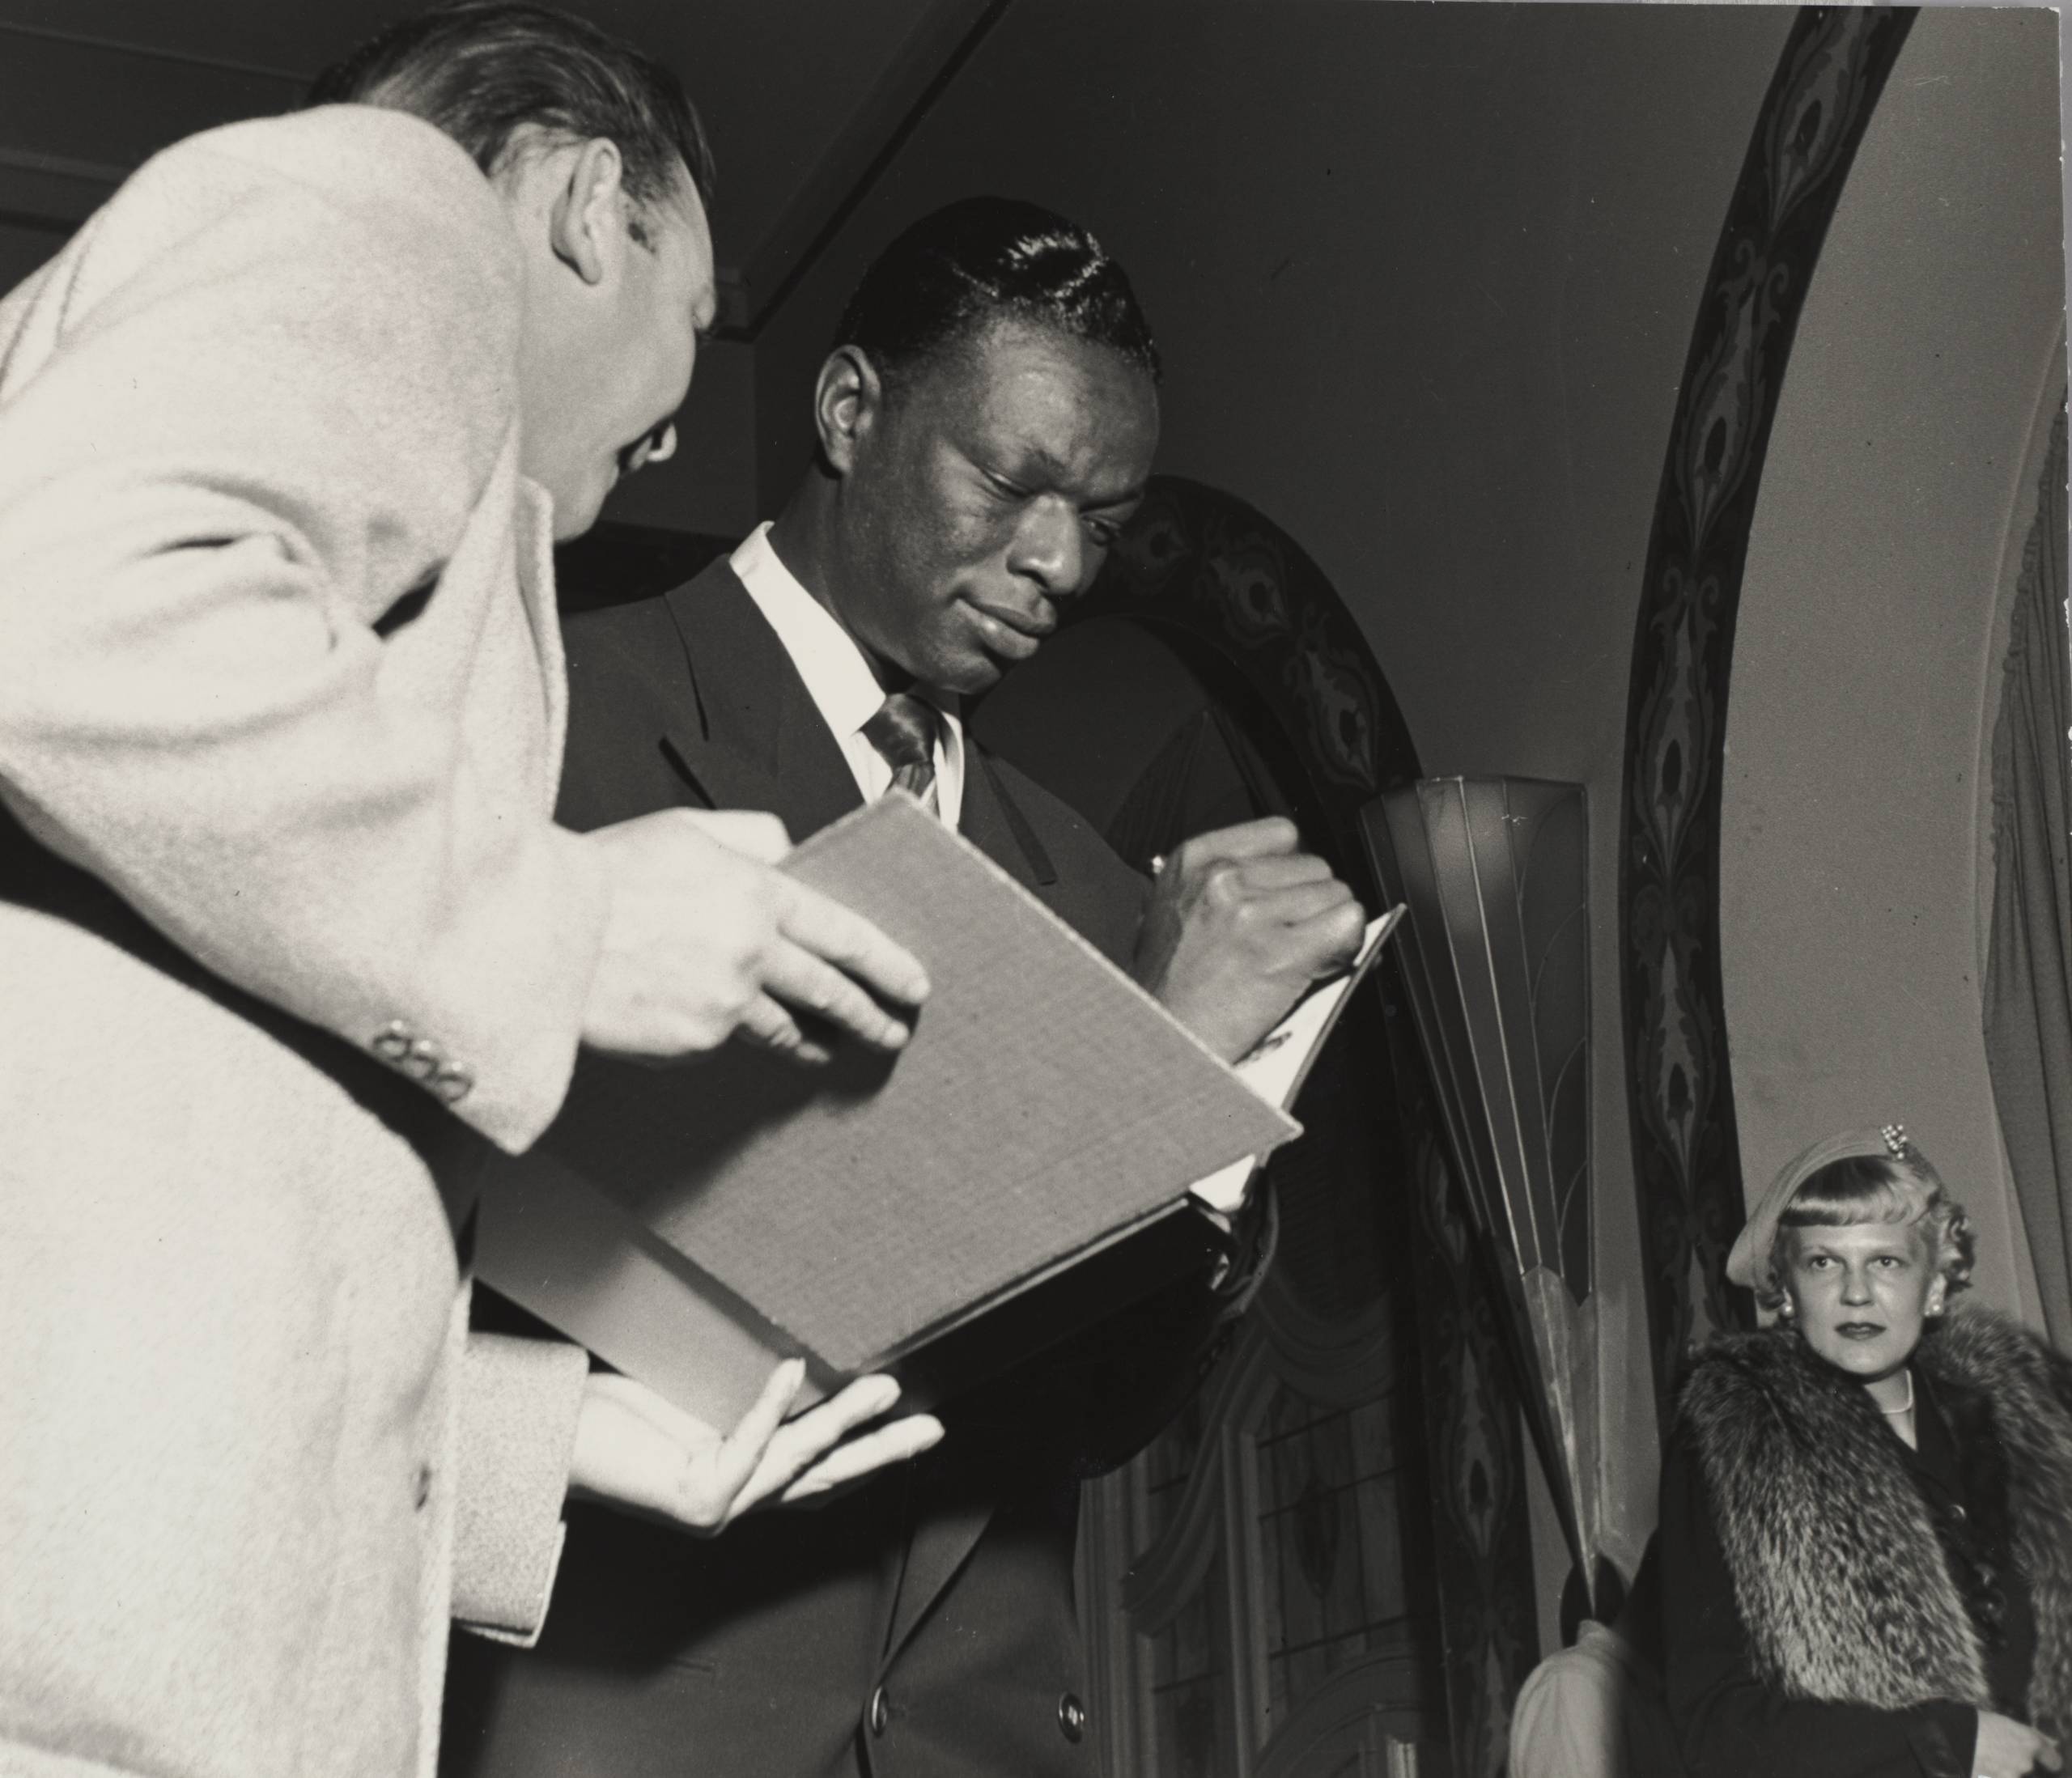 Black-and-white photo of a man signing a book held by another person